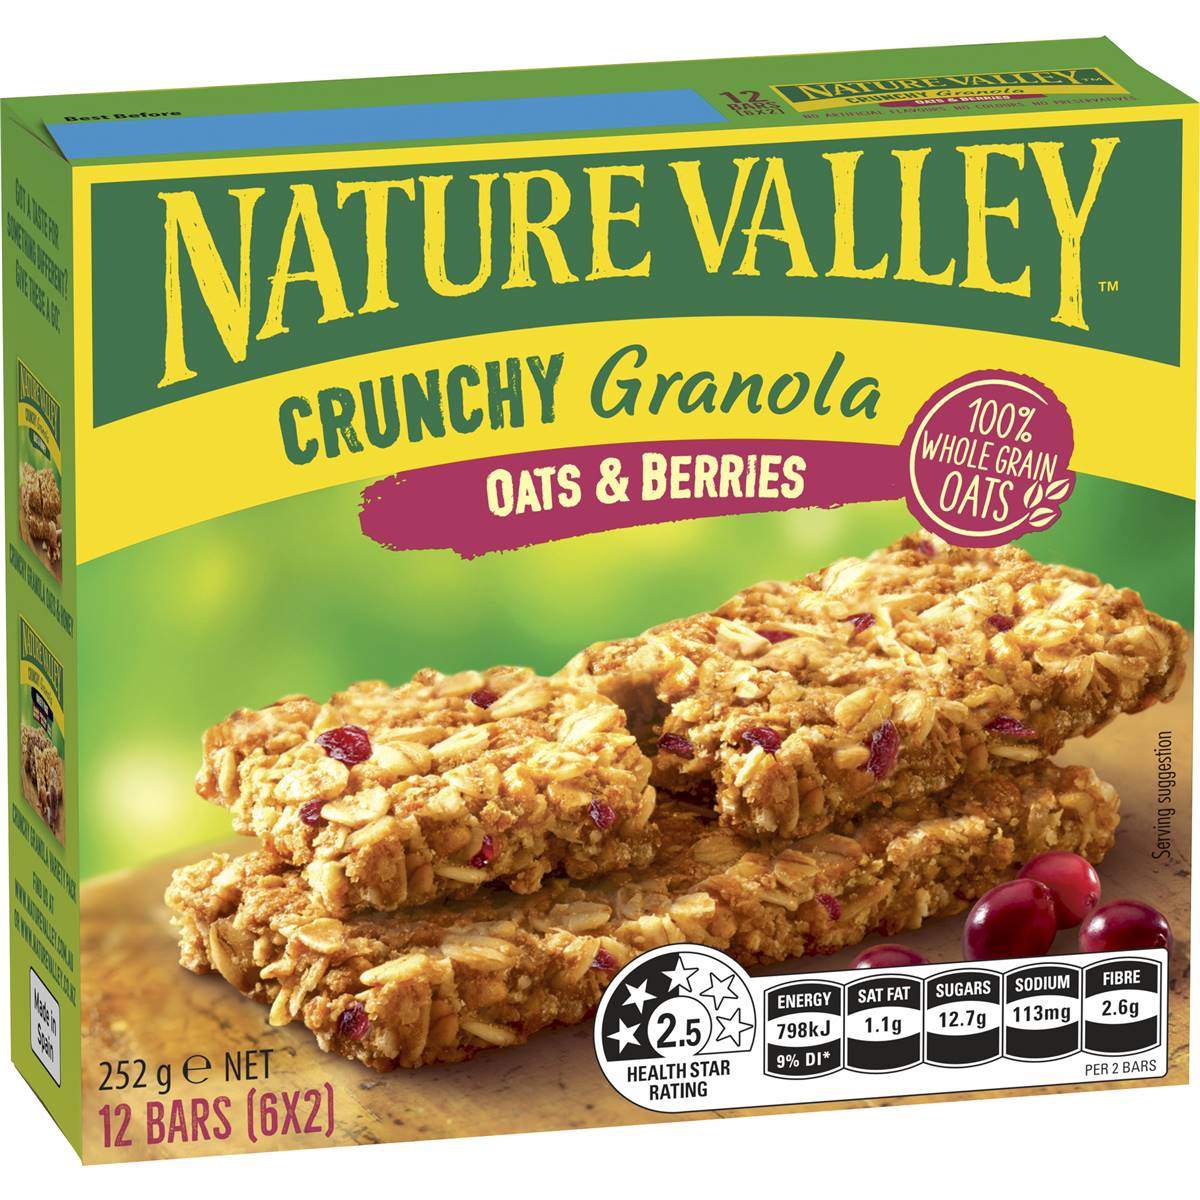 Calories in Nature Valley Crunchy Oats & Berries Granola Bars